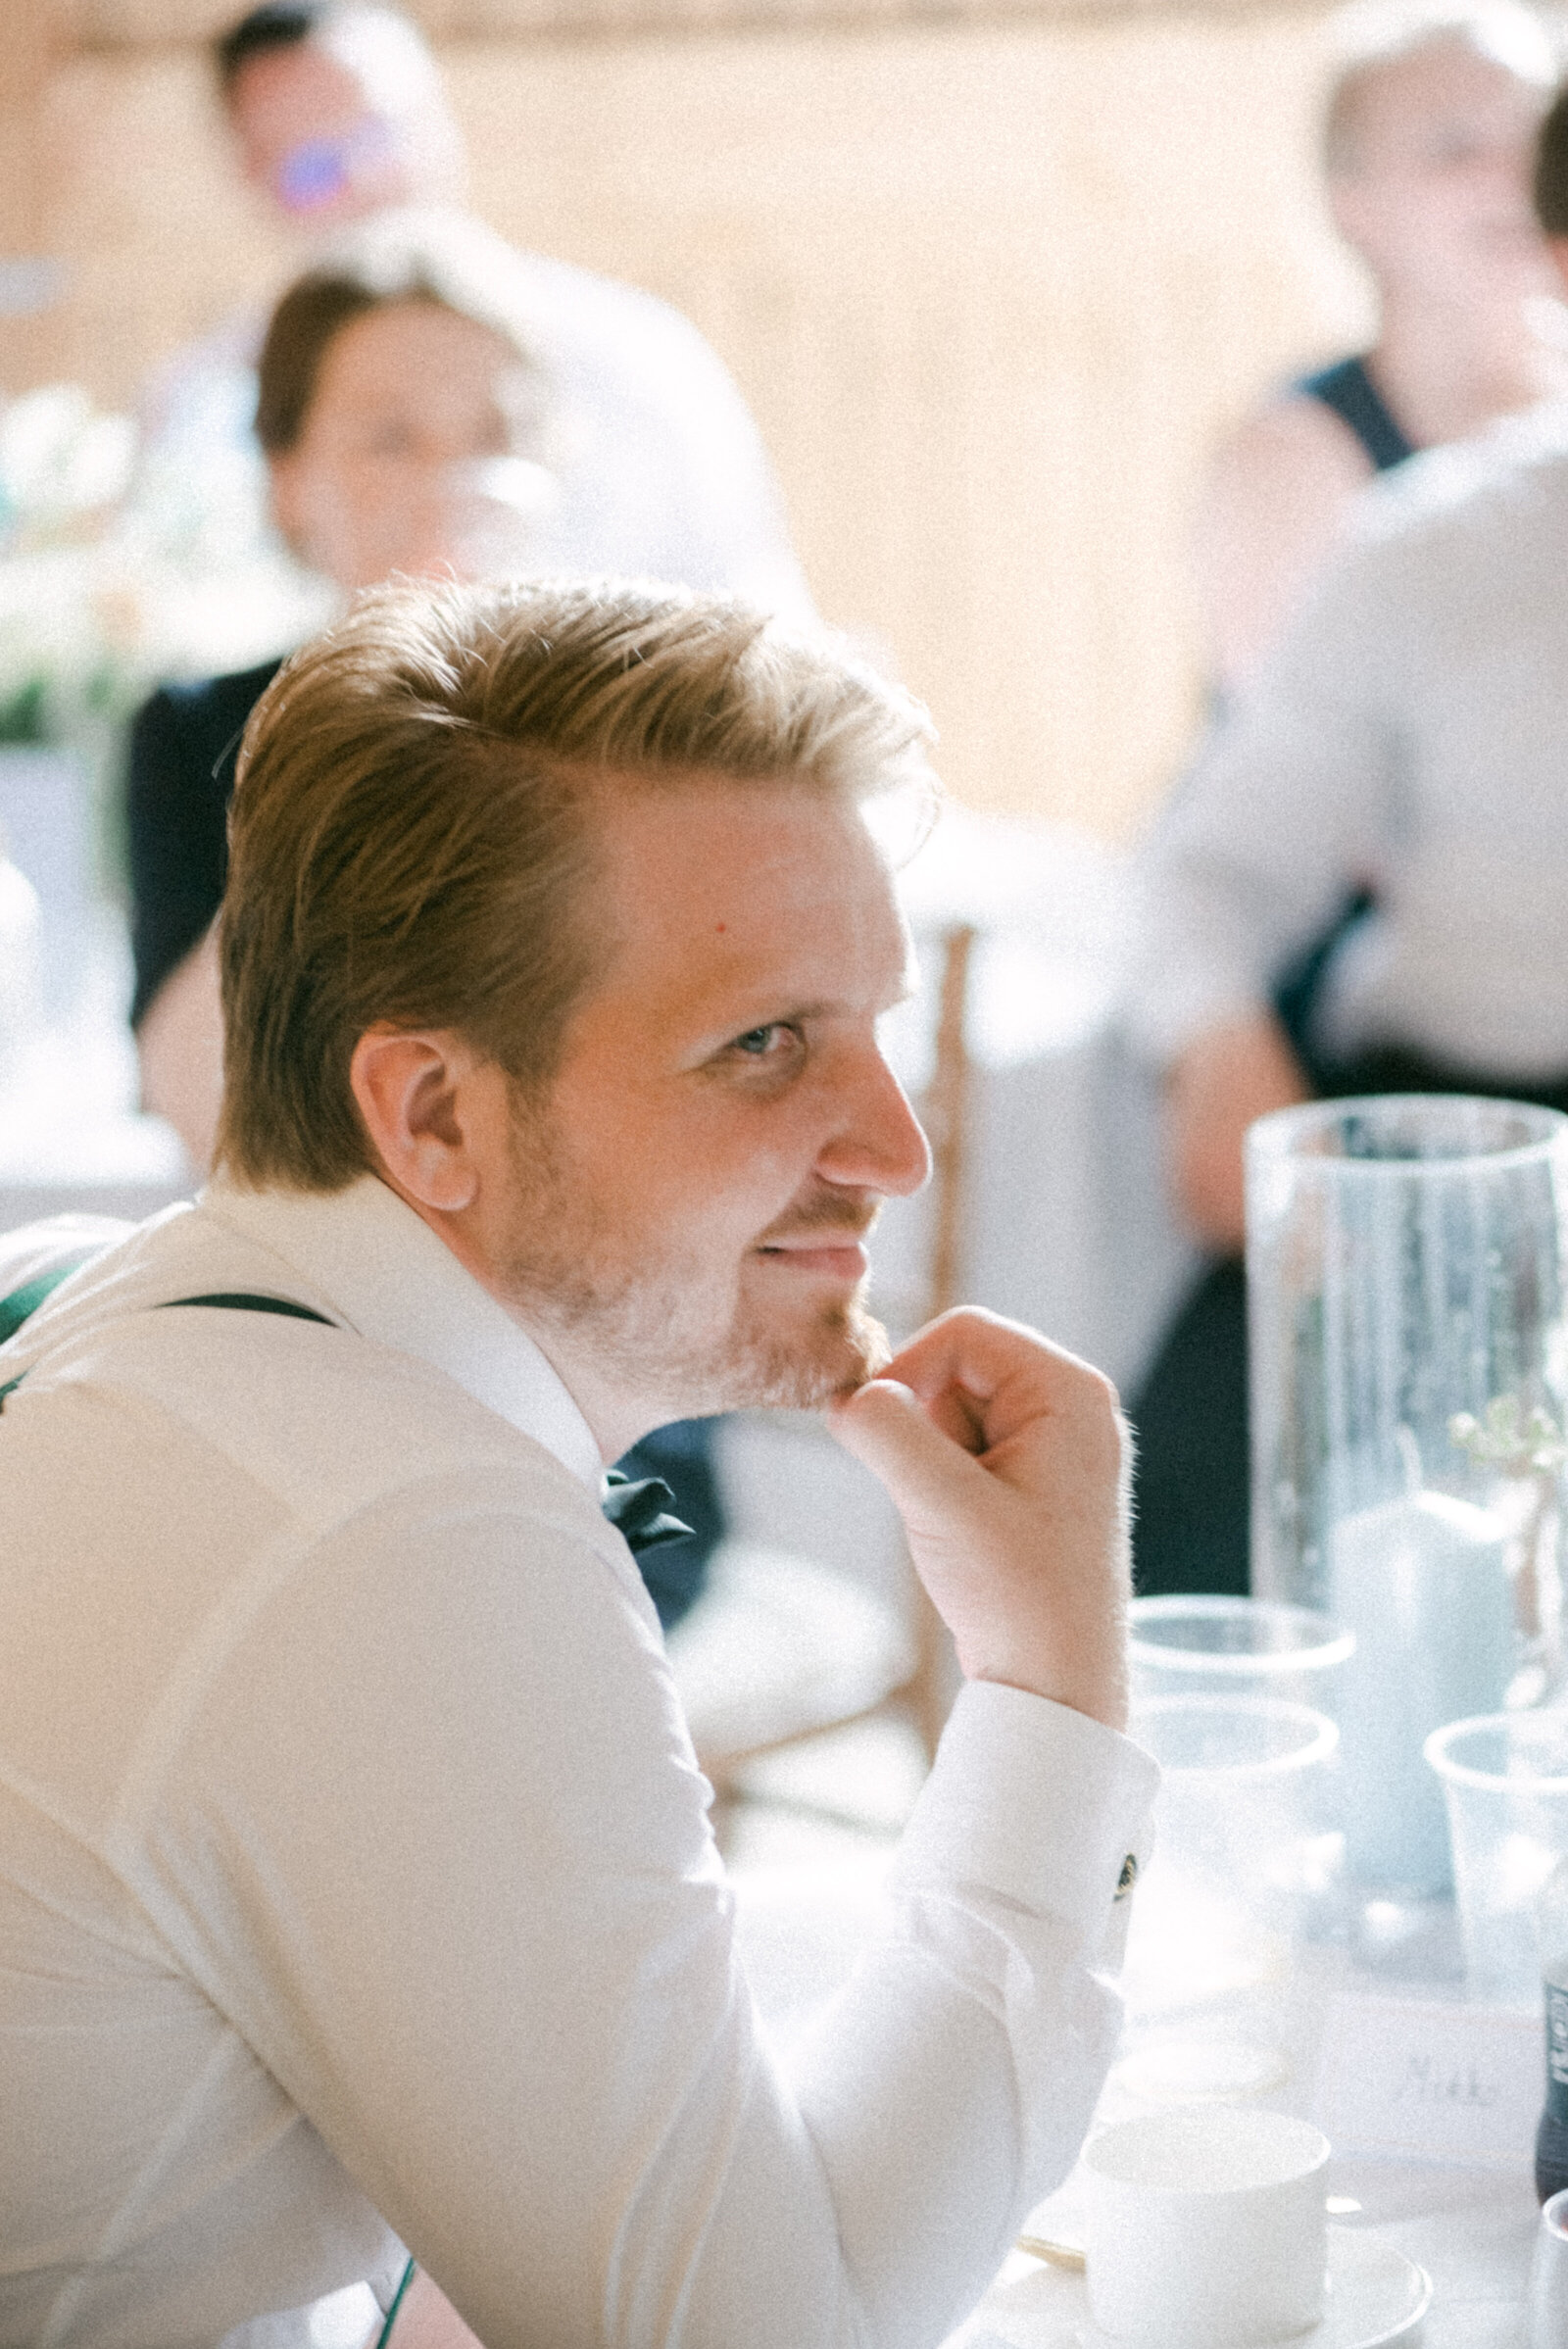 A groom at the wedding photographed by wedding photographer Hannika Gabrielsson.